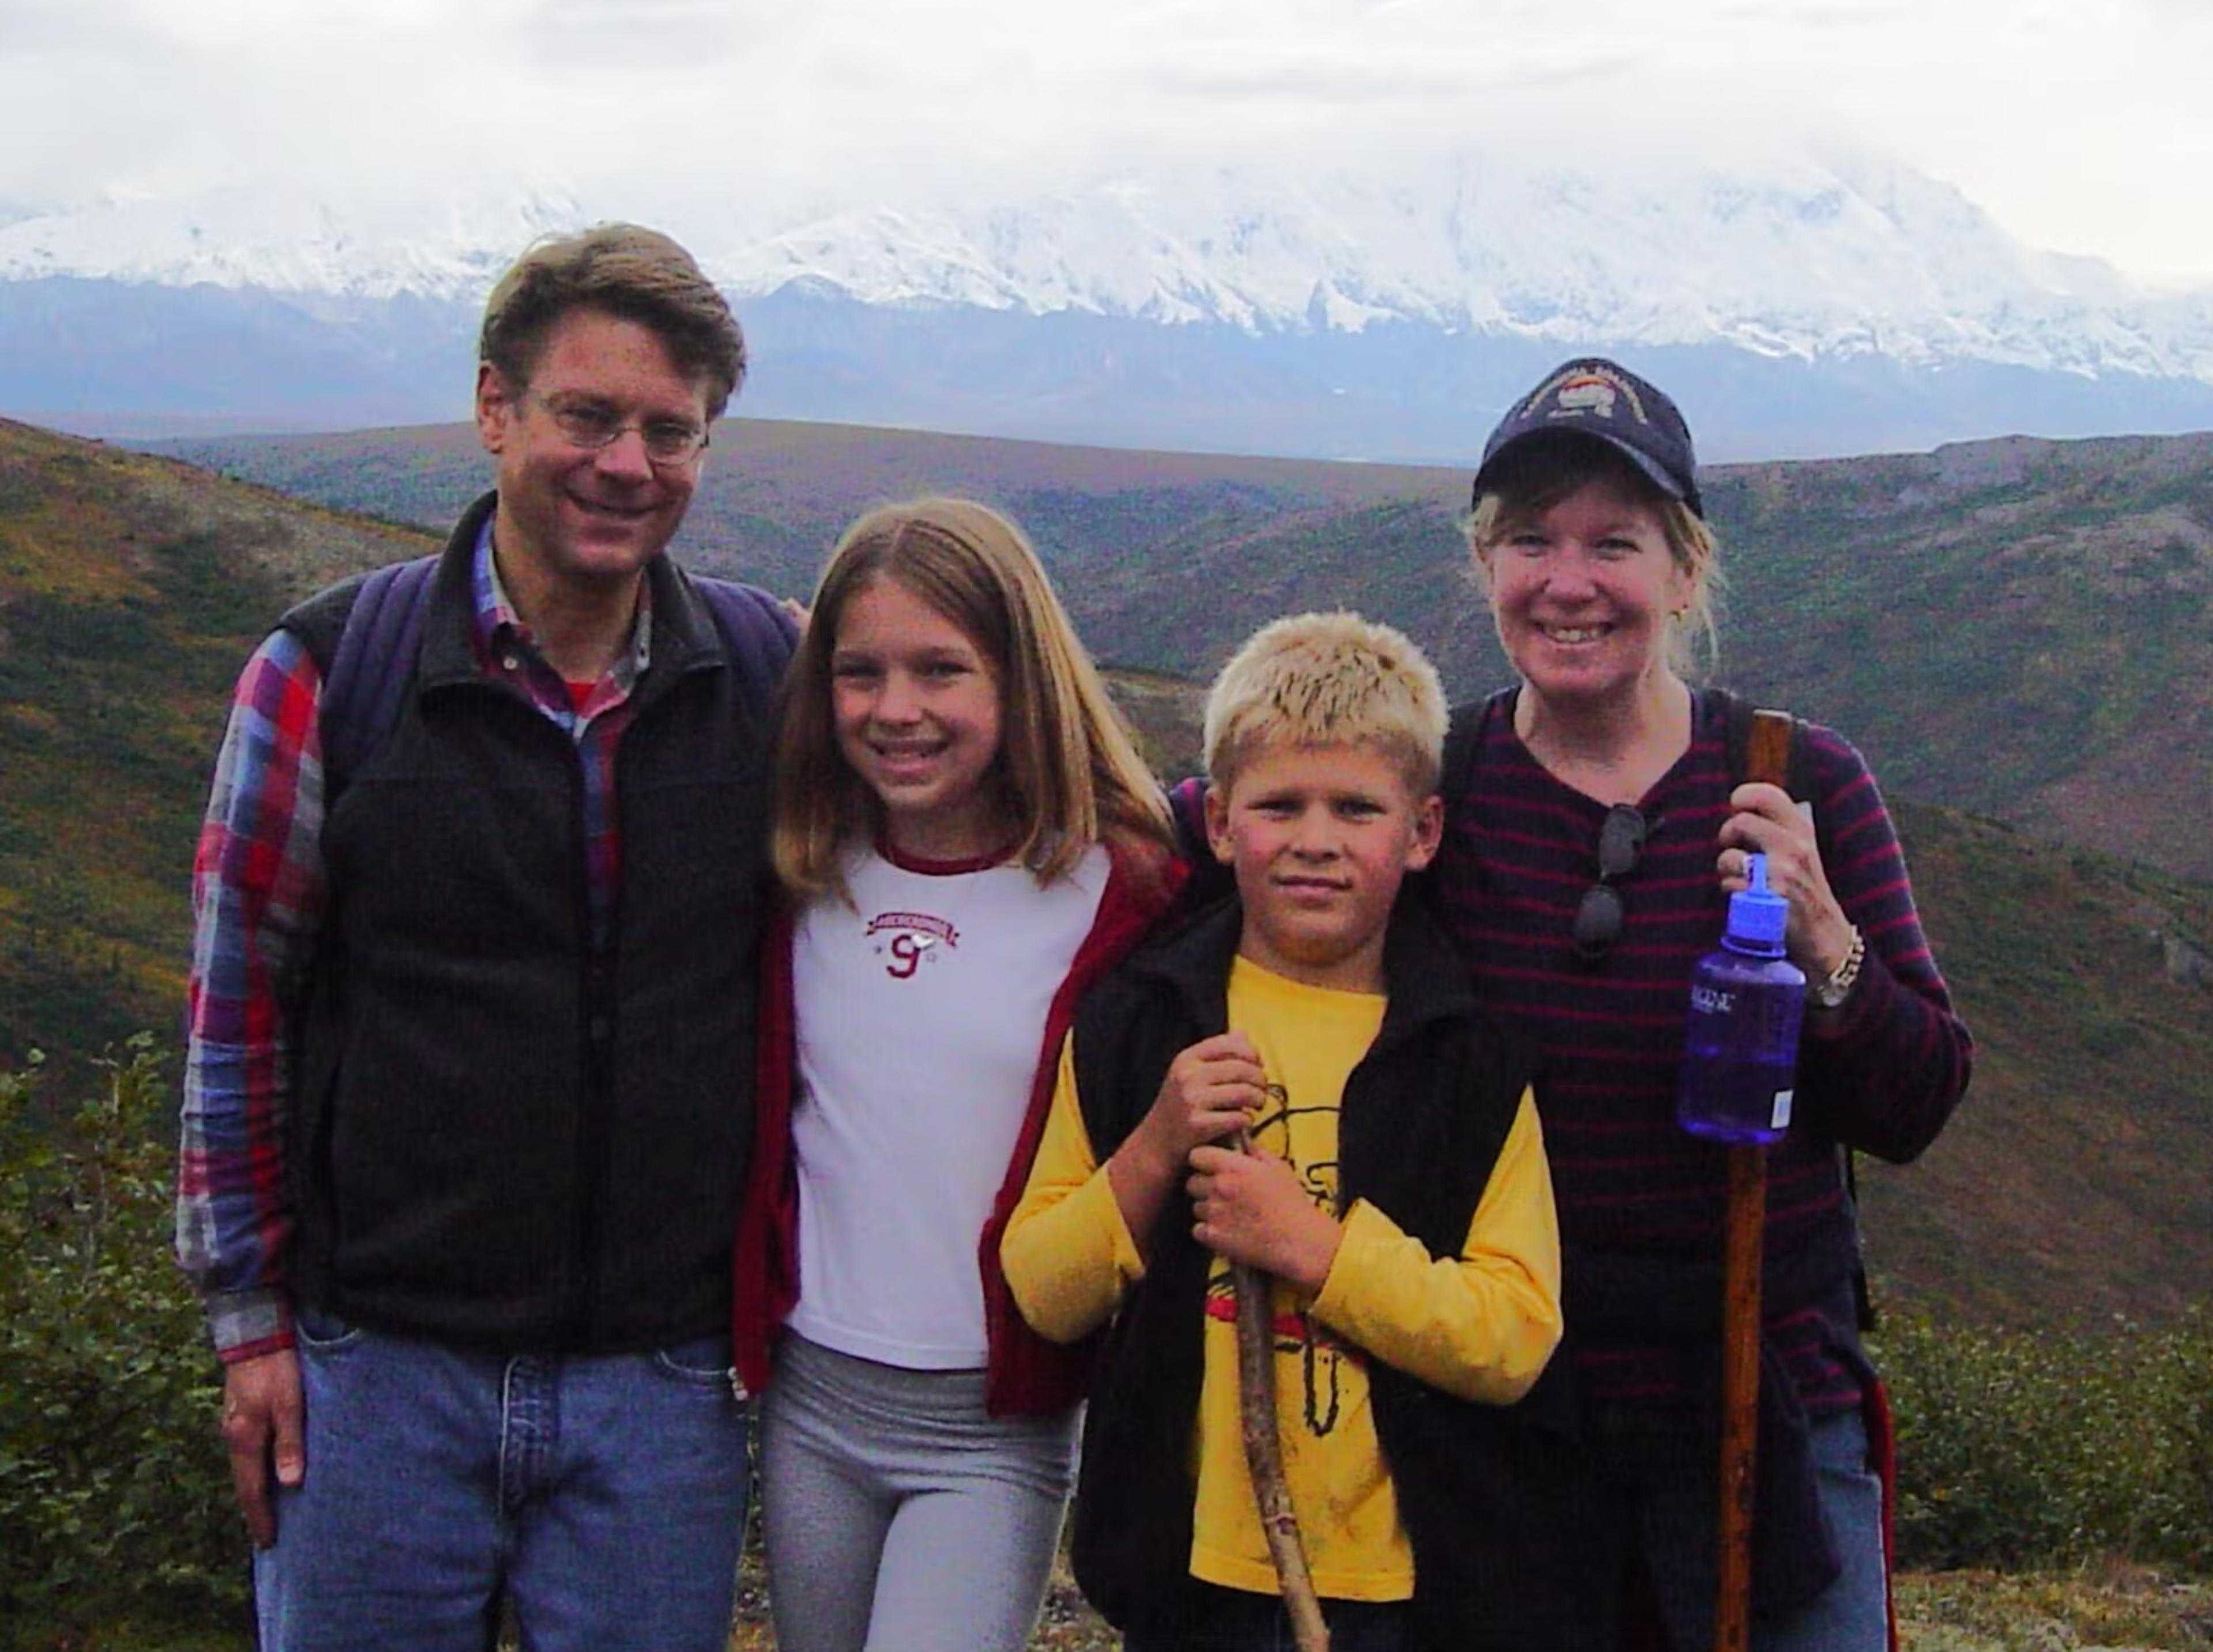 Equip founder Kristina Saffran as an adolescent, posing with her family while hiking with mountains in the background.